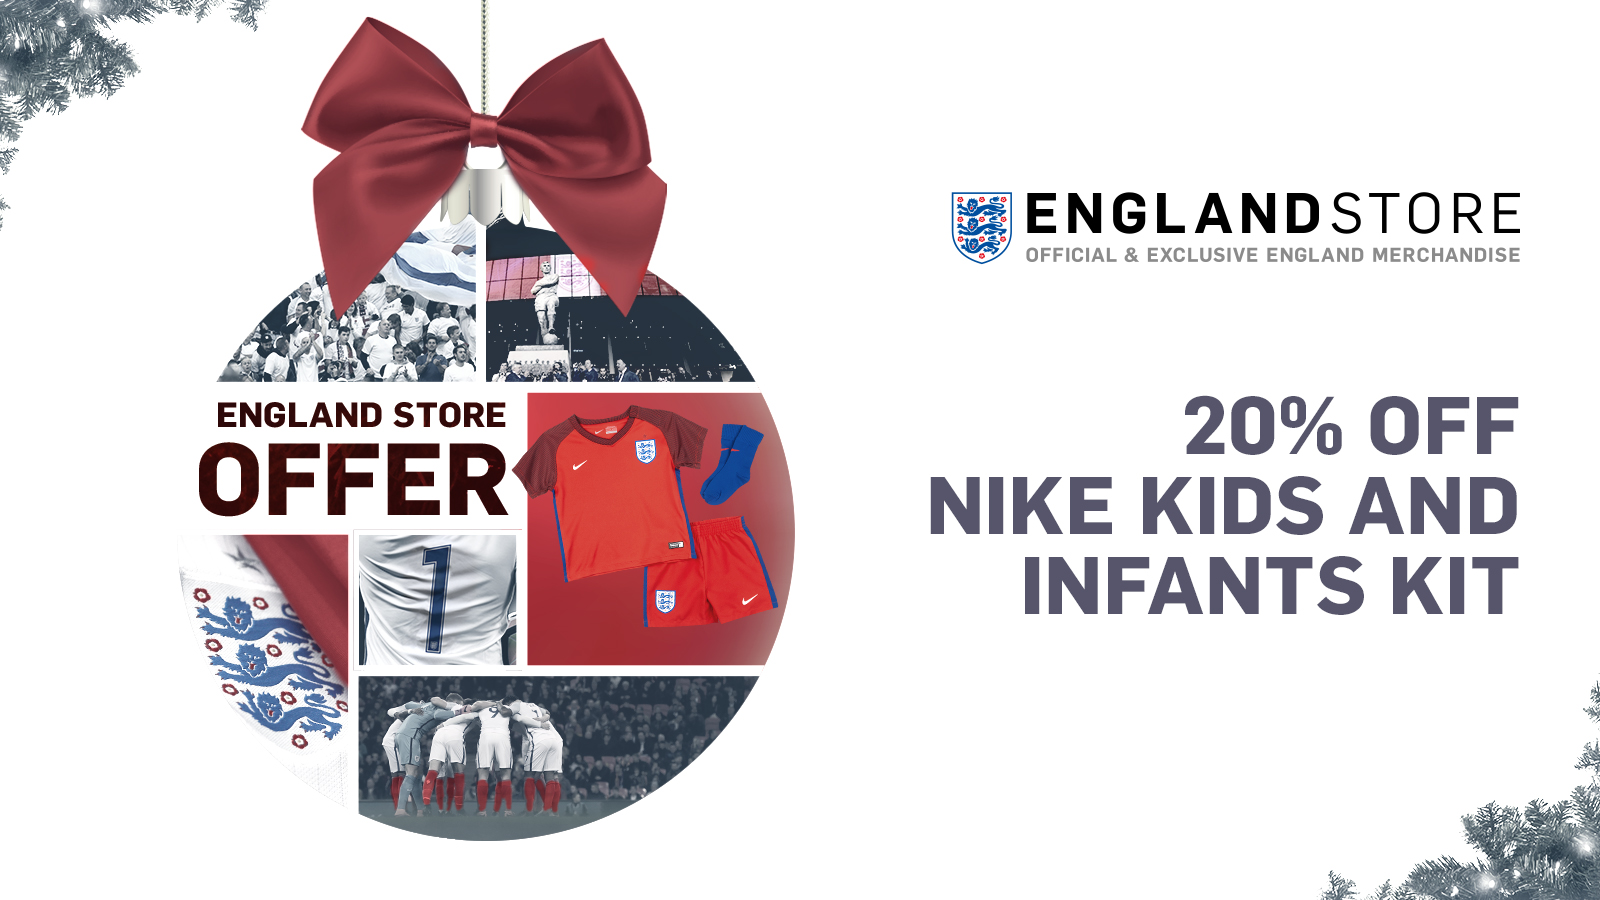 Day 1 of our Christmas advent calendar: England Store offer